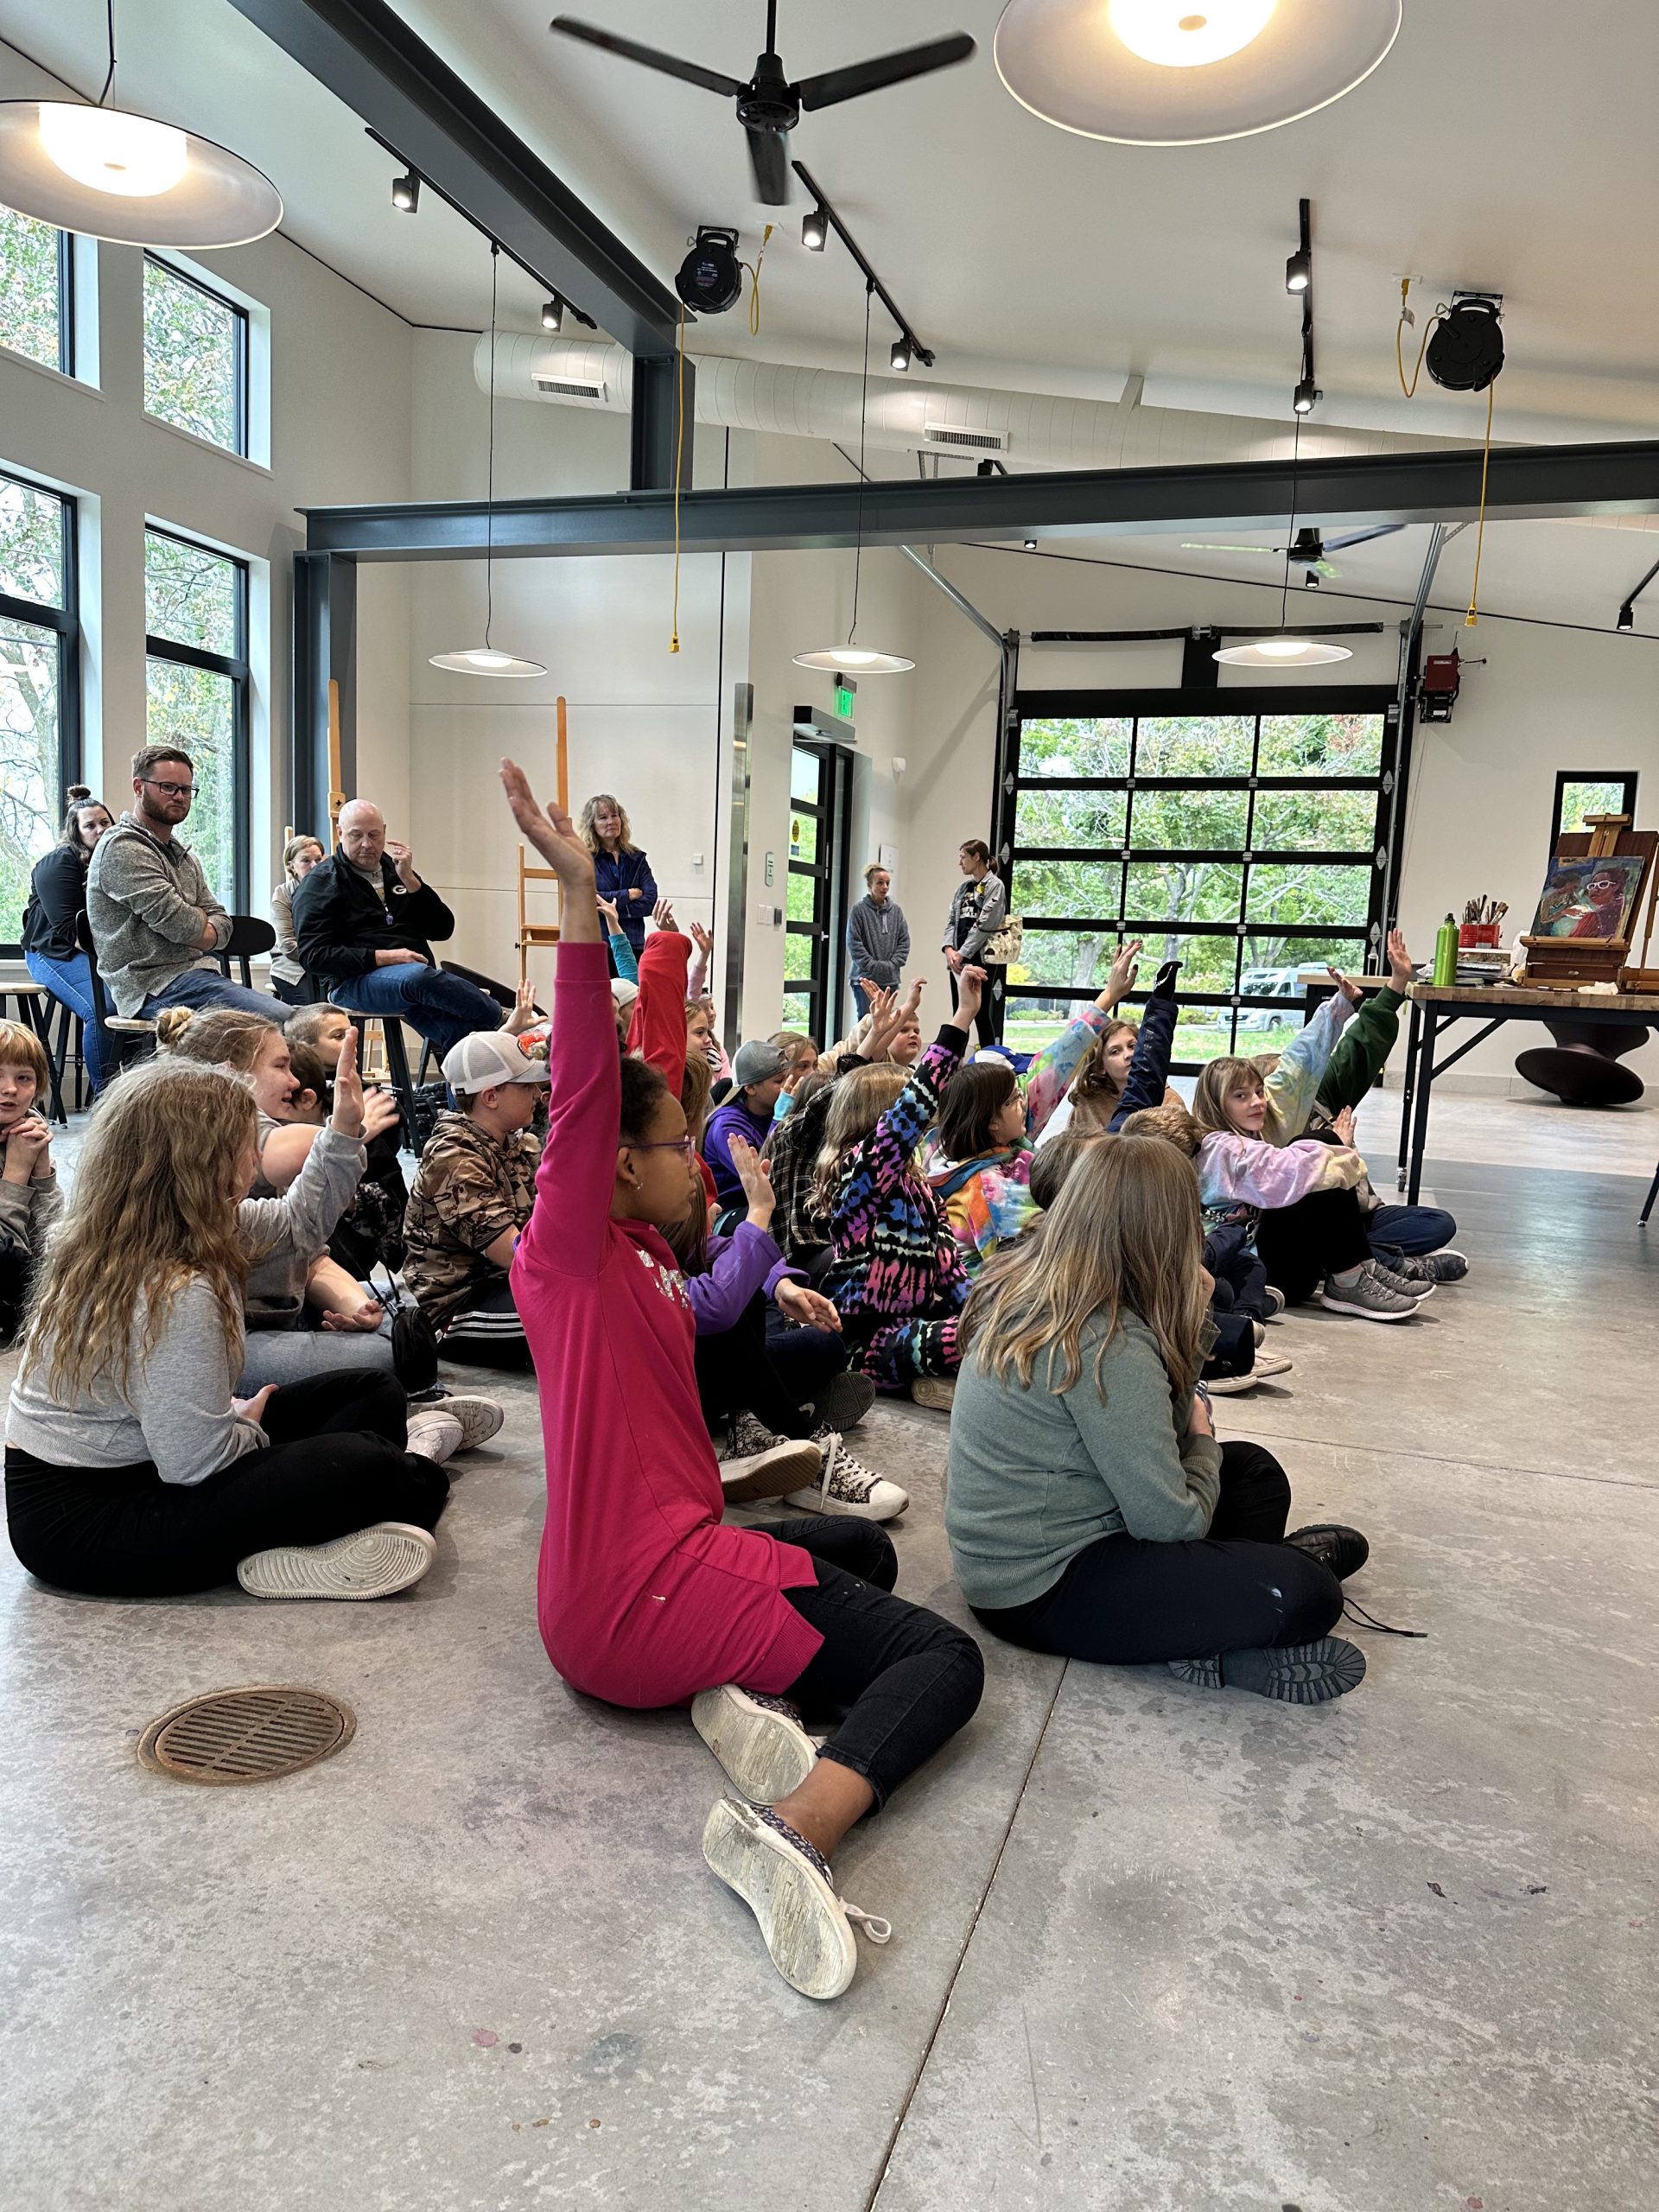 Several students sit on the concrete floor of the Museum's Glass Box Studio. They are engaged and raising hands to ask questions of the artist.